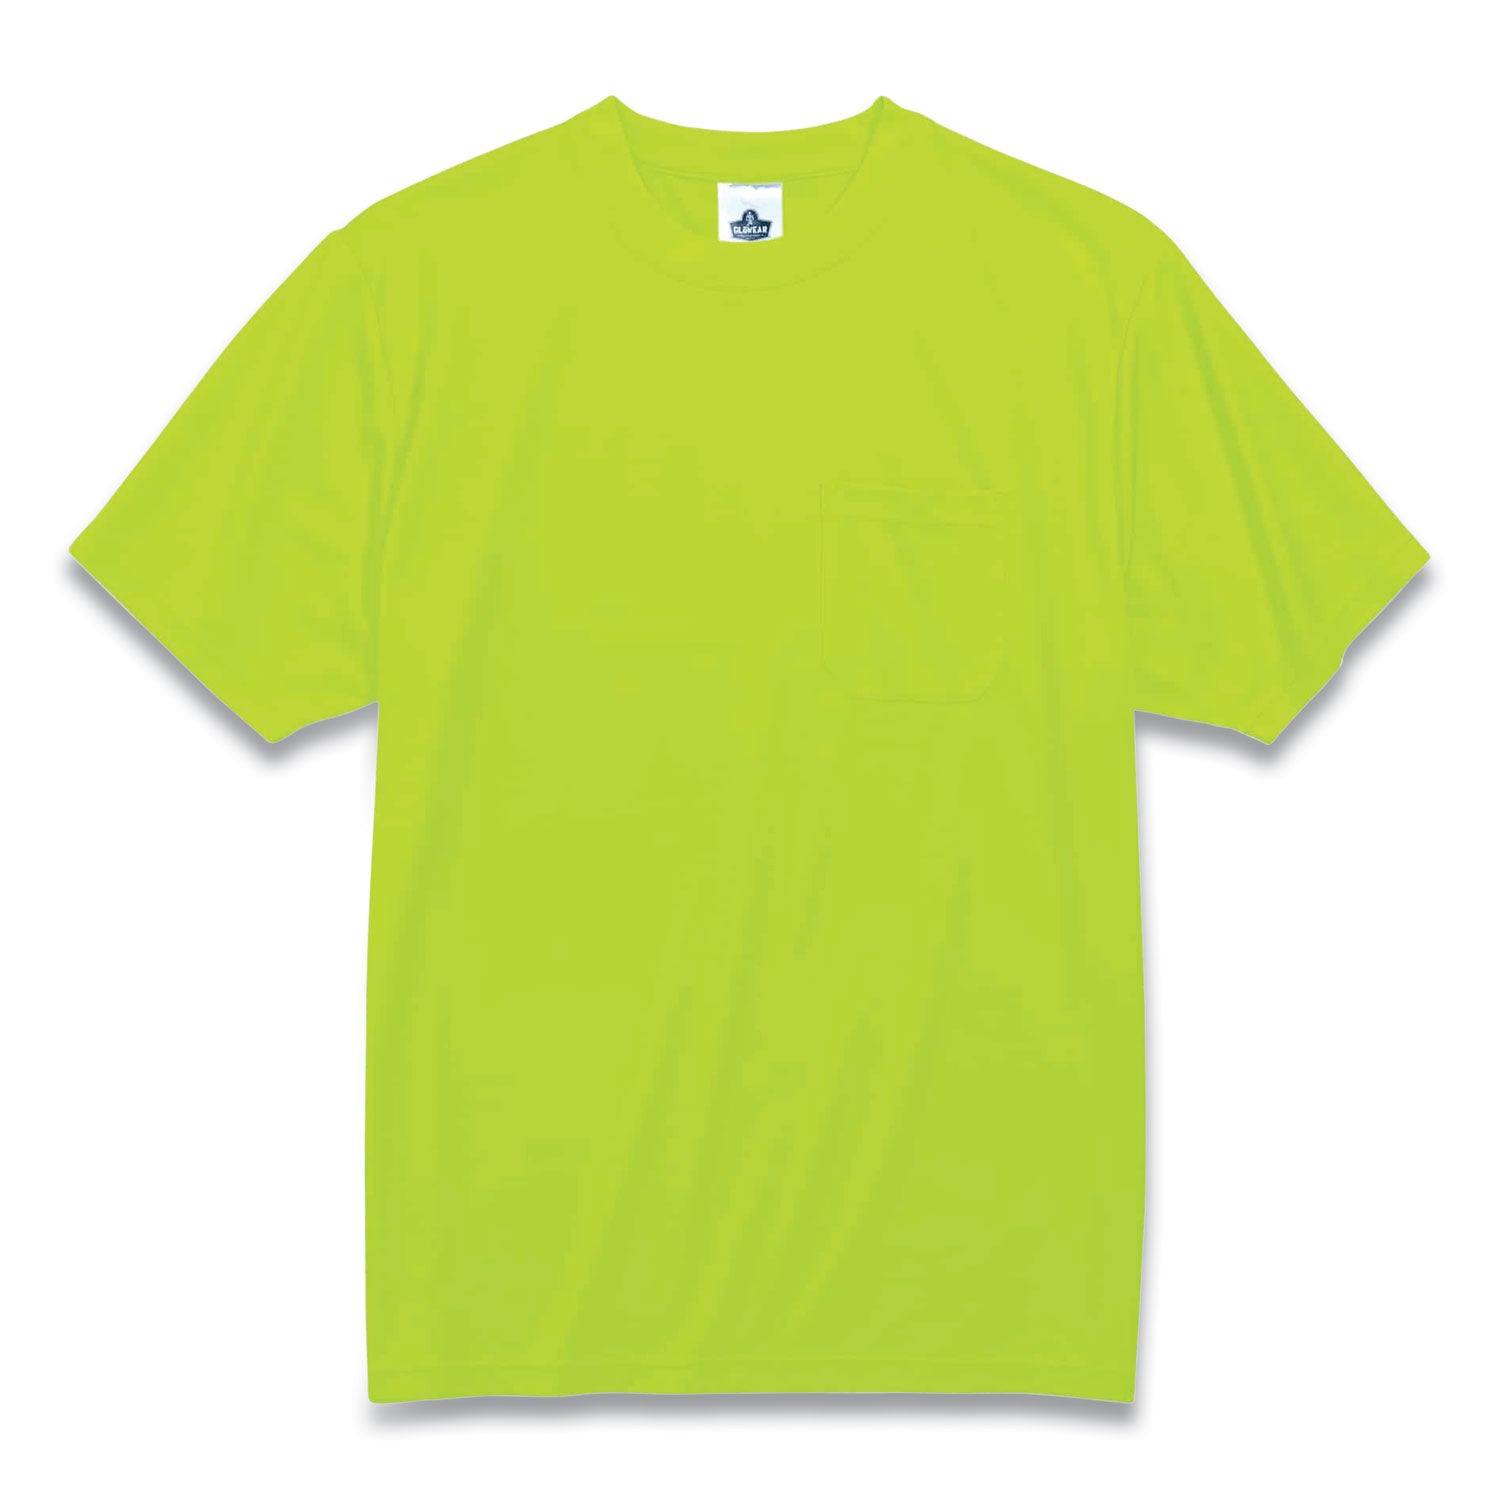 glowear-8089-non-certified-hi-vis-t-shirt-polyester-medium-lime-ships-in-1-3-business-days_ego21553 - 1